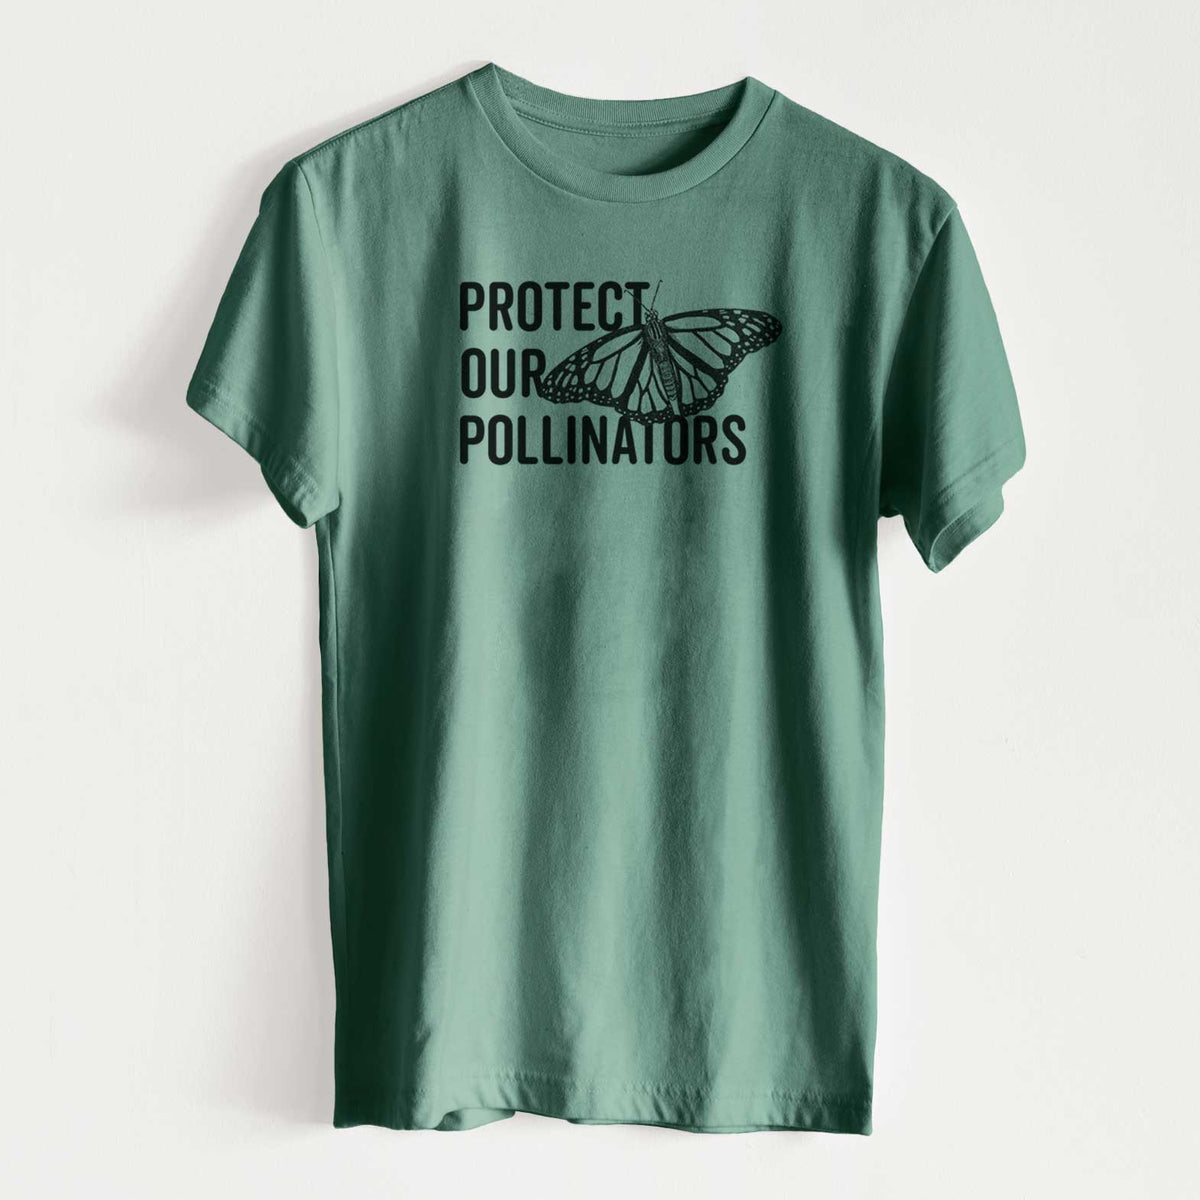 Protect our Pollinators - Unisex Recycled Eco Tee  - CLOSEOUT - FINAL SALE